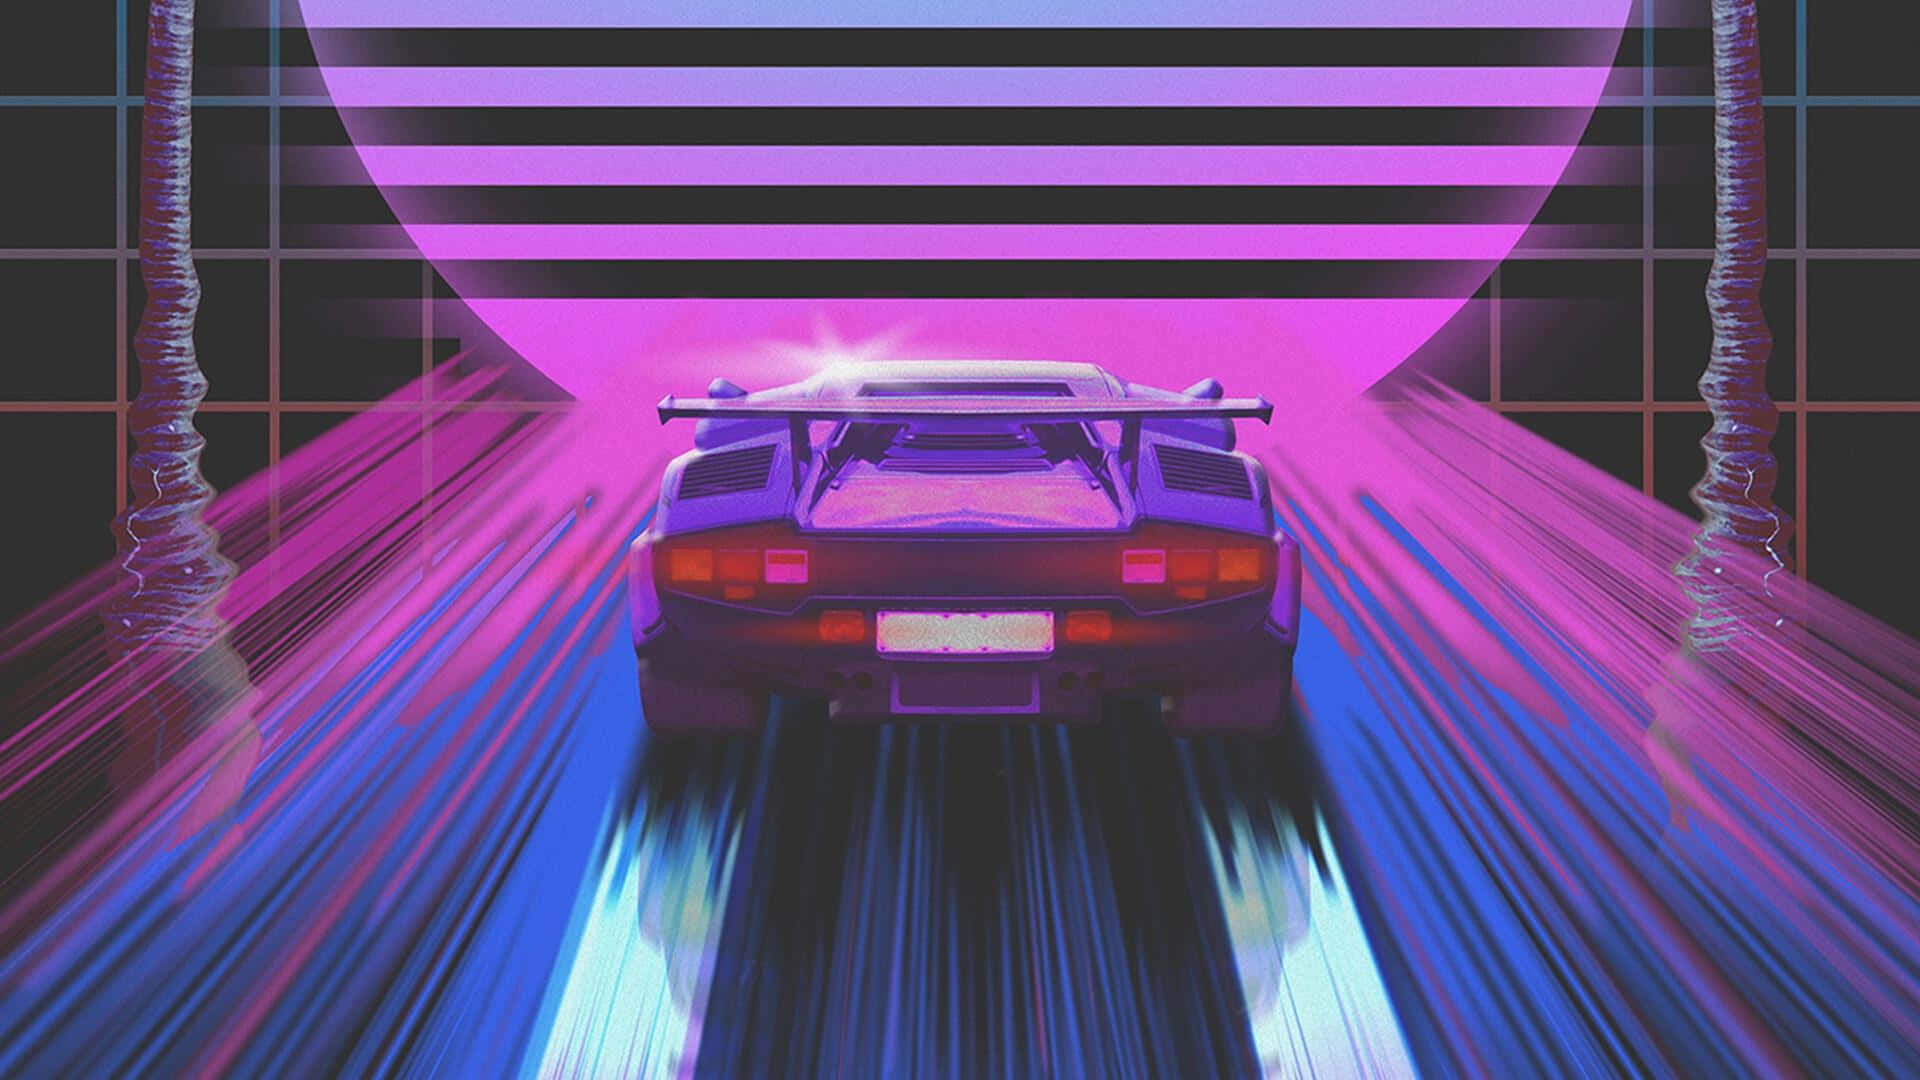 Step into the future of the past with this retro 80s-inspied wallpaper